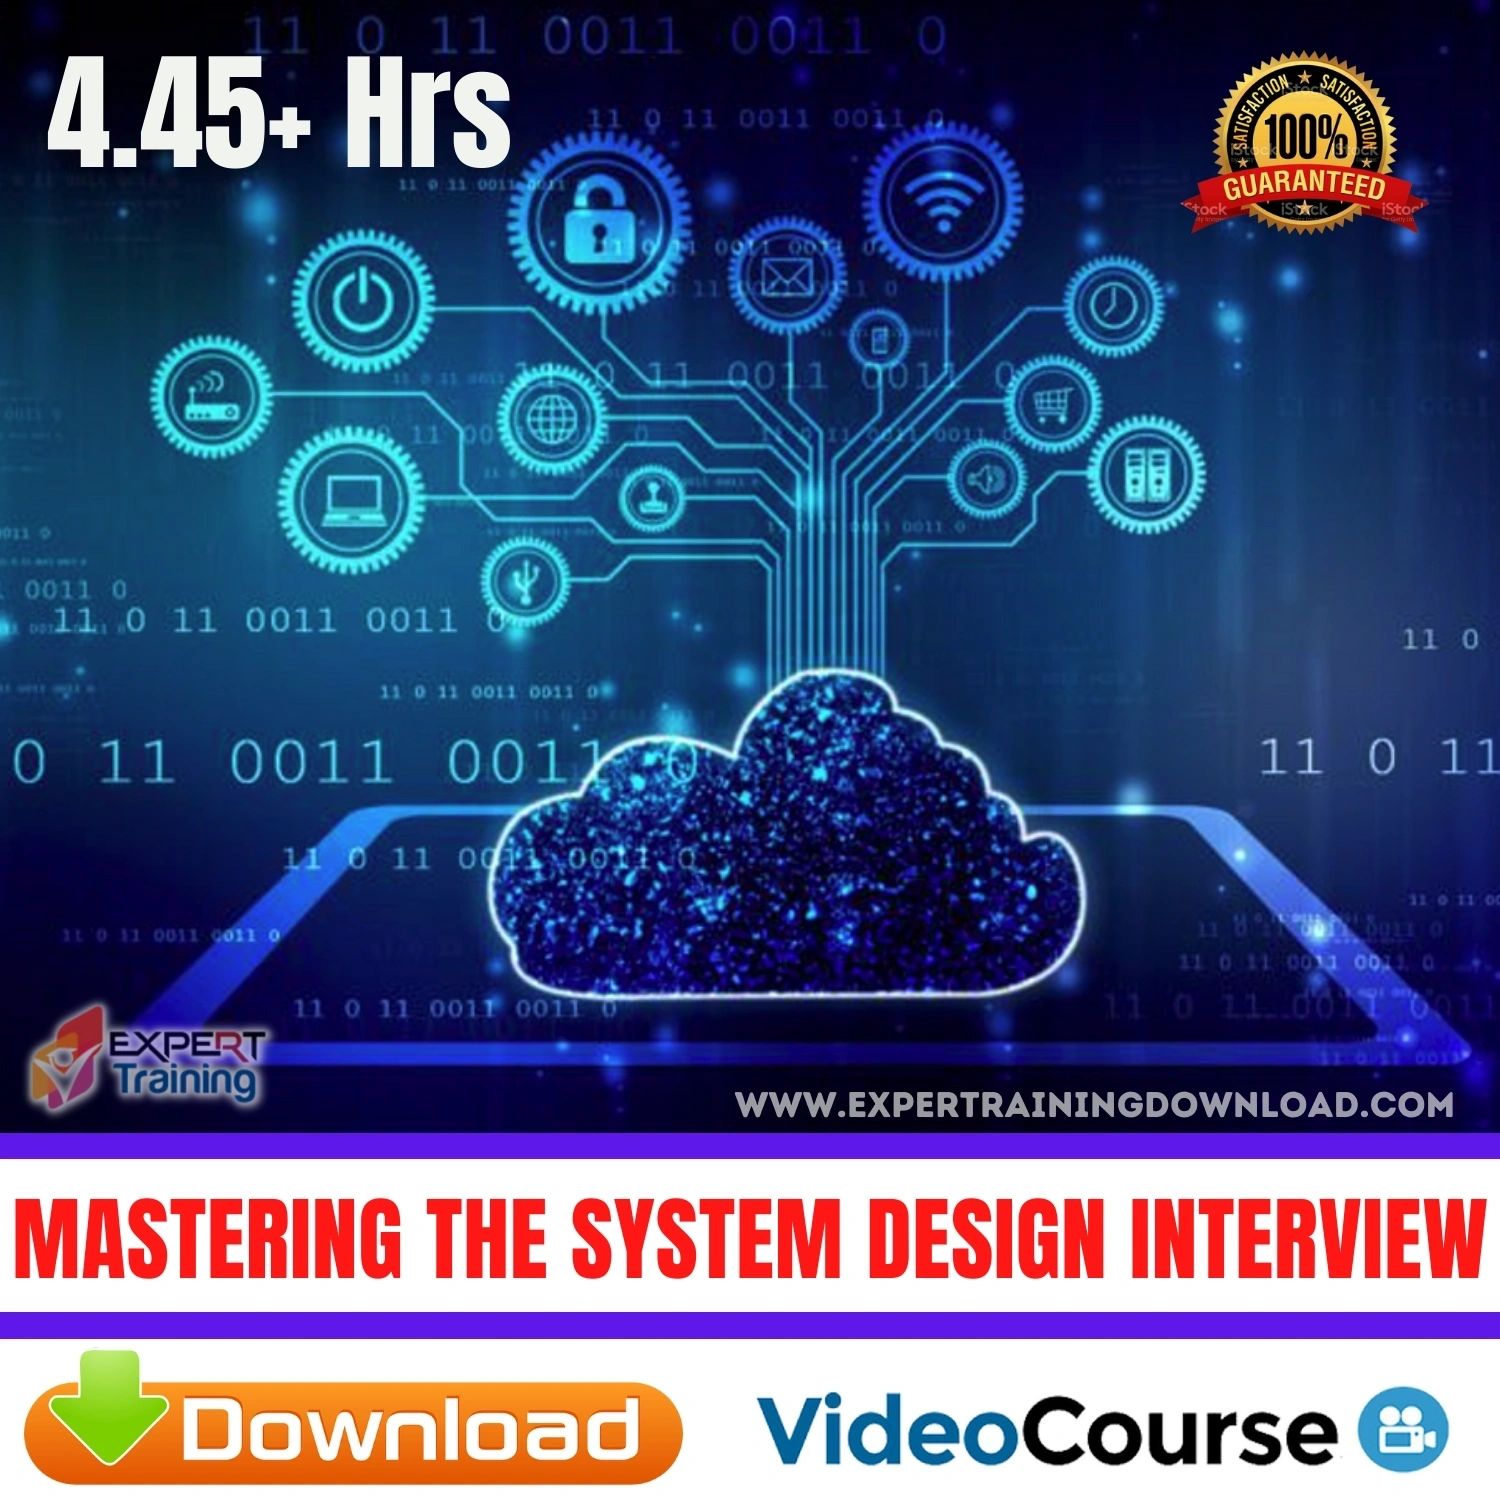 Mastering the System Design Interview